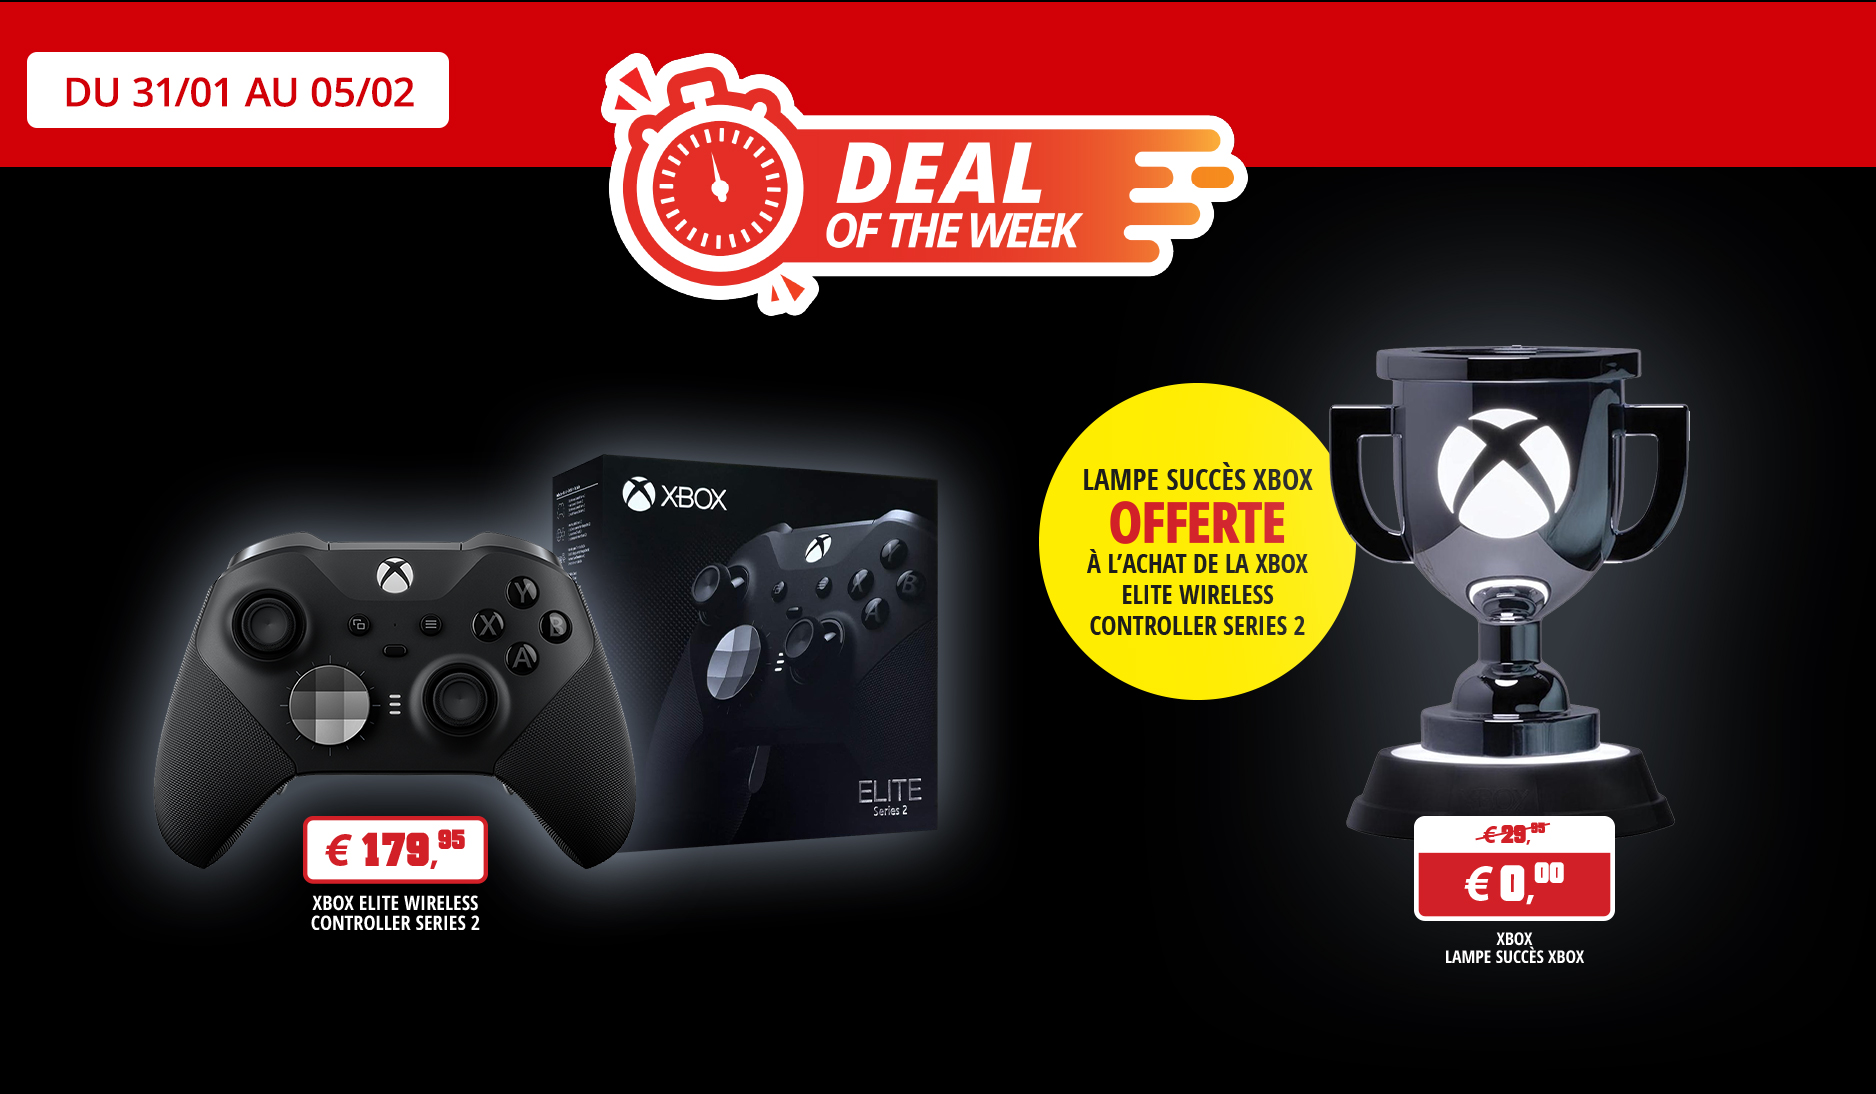 Deal of the week: xbox elite wireless controller